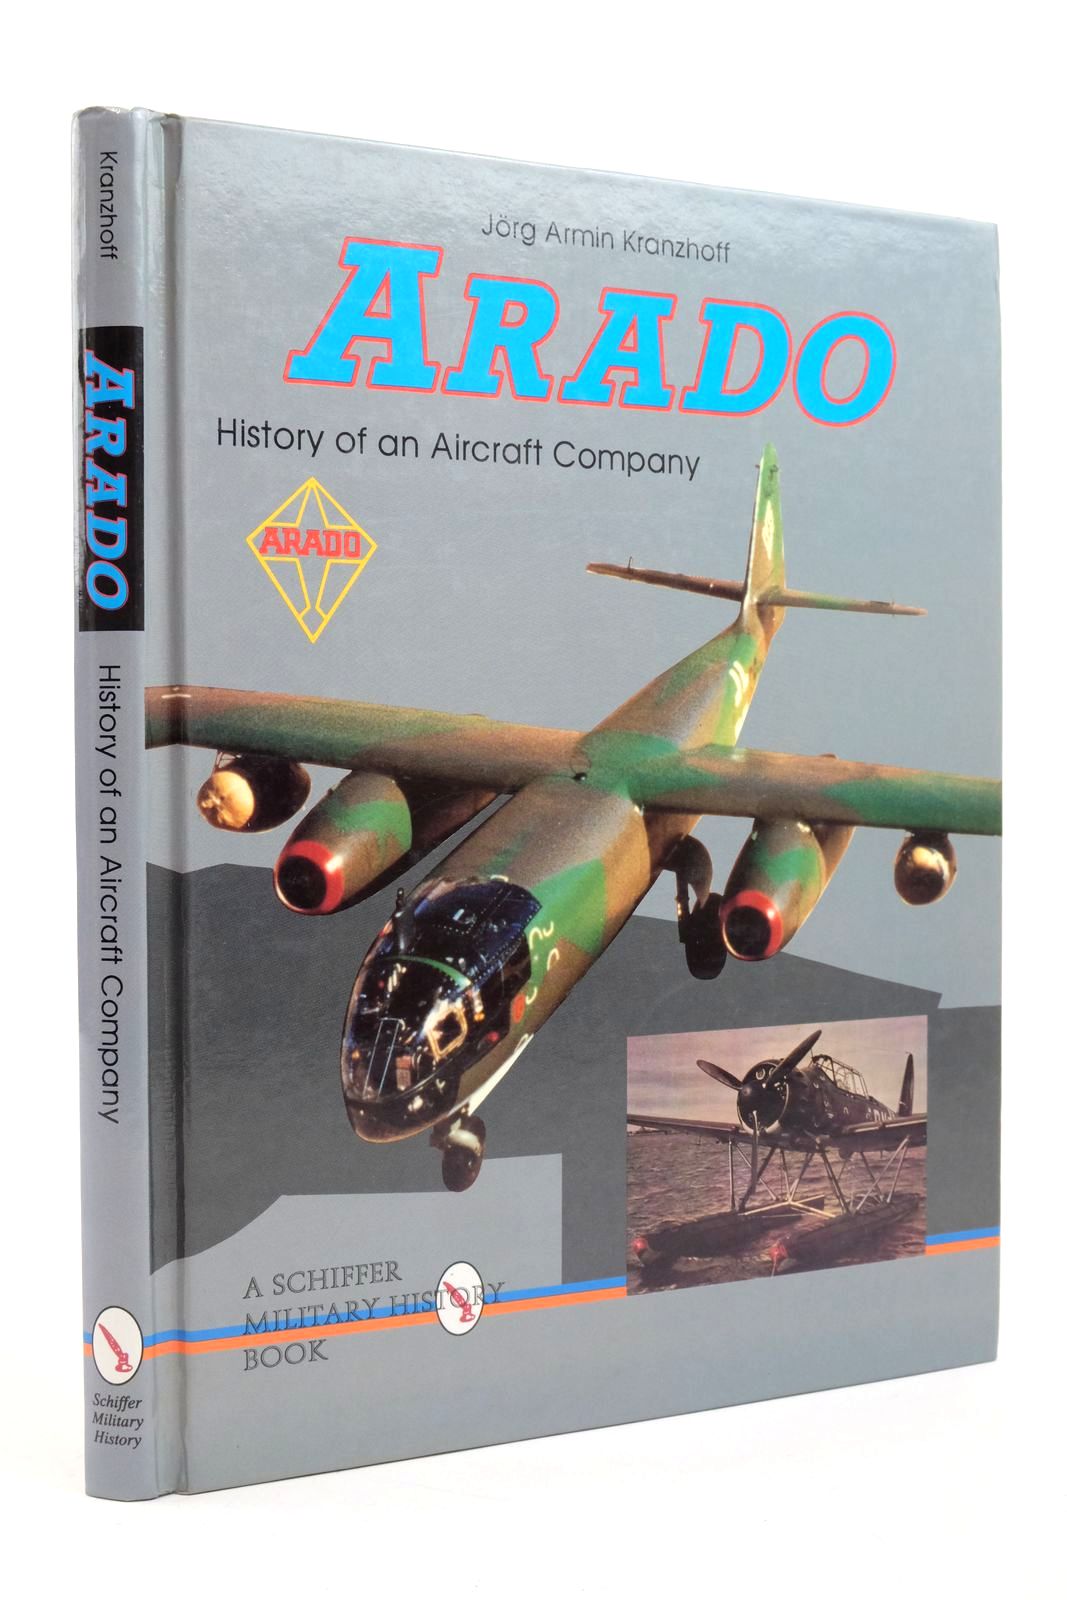 Photo of ARADO HISTORY OF AN AIRCRAFT COMPANY written by Kranzhoff, Jorg Armin published by Schiffer Military History (STOCK CODE: 2138581)  for sale by Stella & Rose's Books